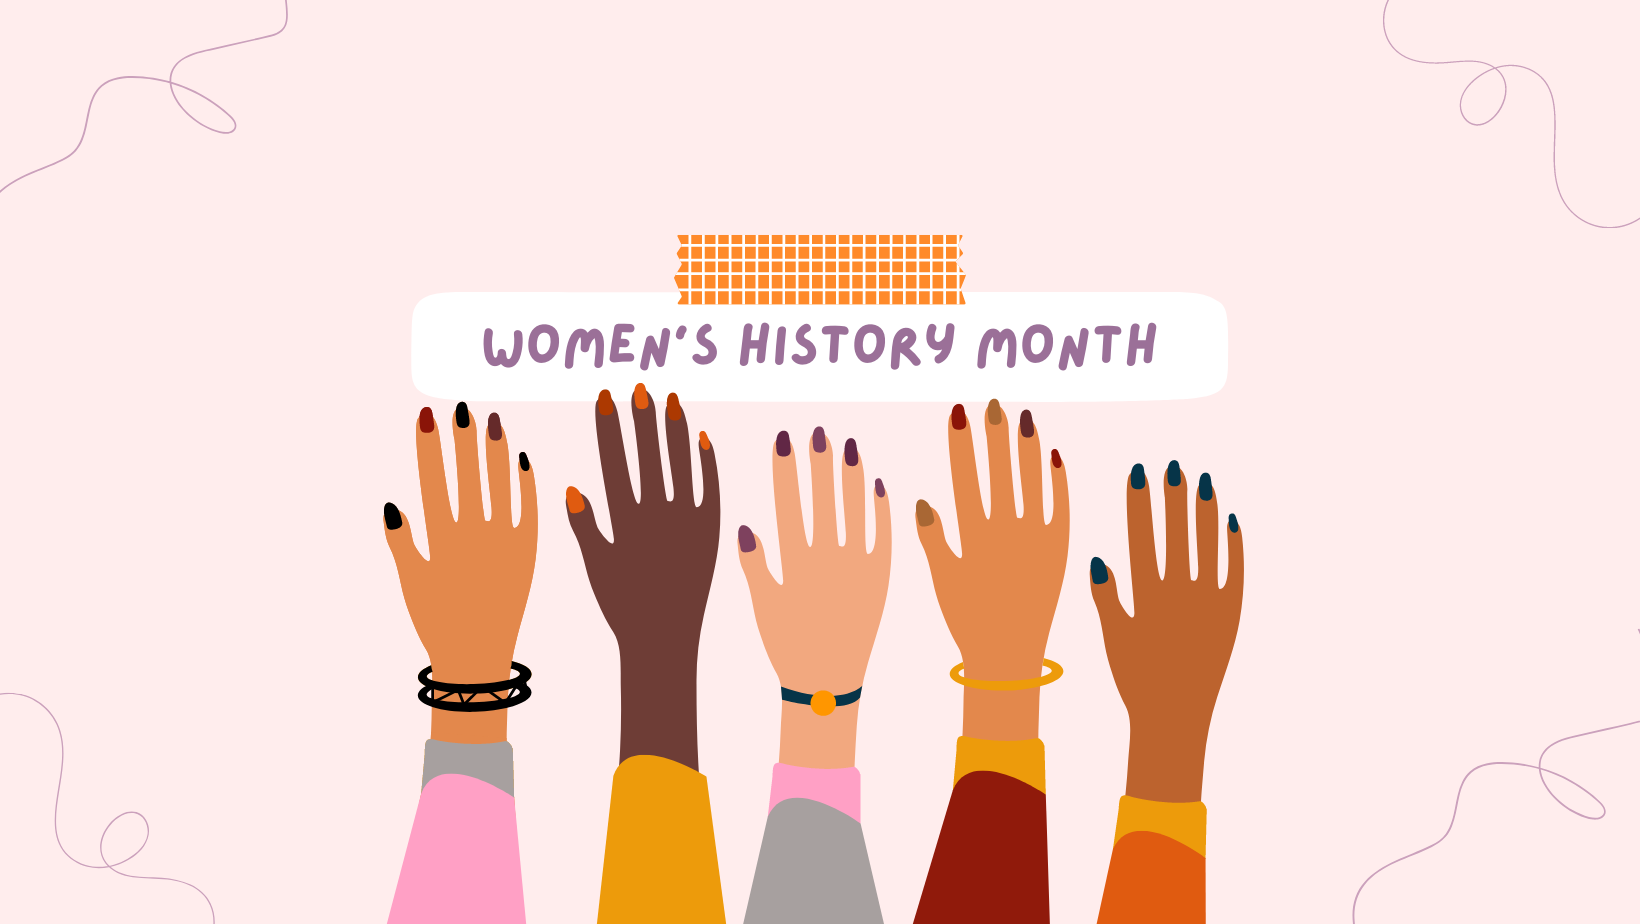 A graphic with the text "Women's History Month" and five women's hands reaching up towards the text. The hands show different skin tones.